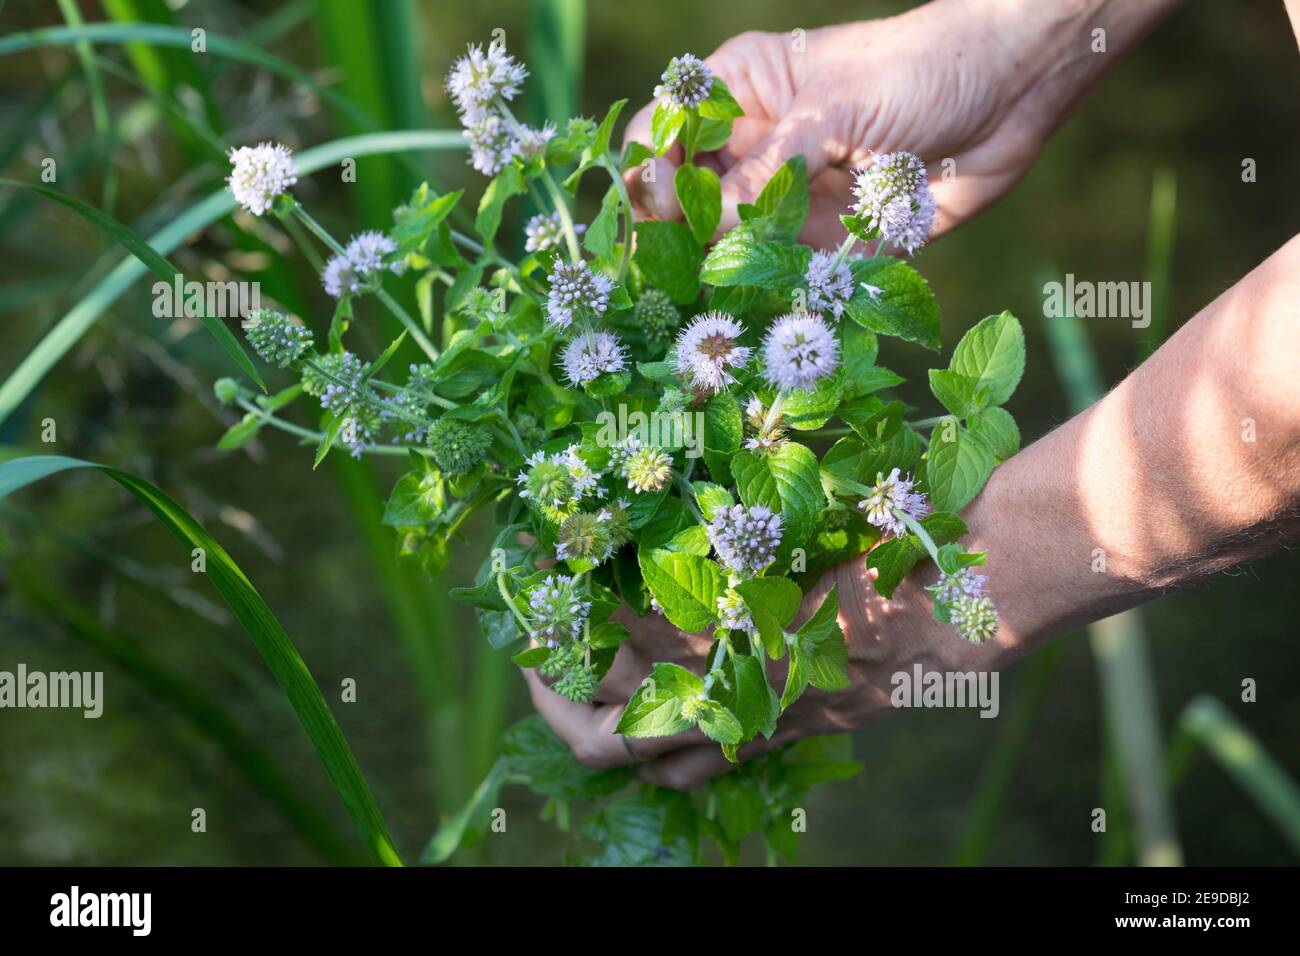 Wild water mint, Water mint, Horse mint (Mentha aquatica), flowering water mint is picked, Germany Stock Photo